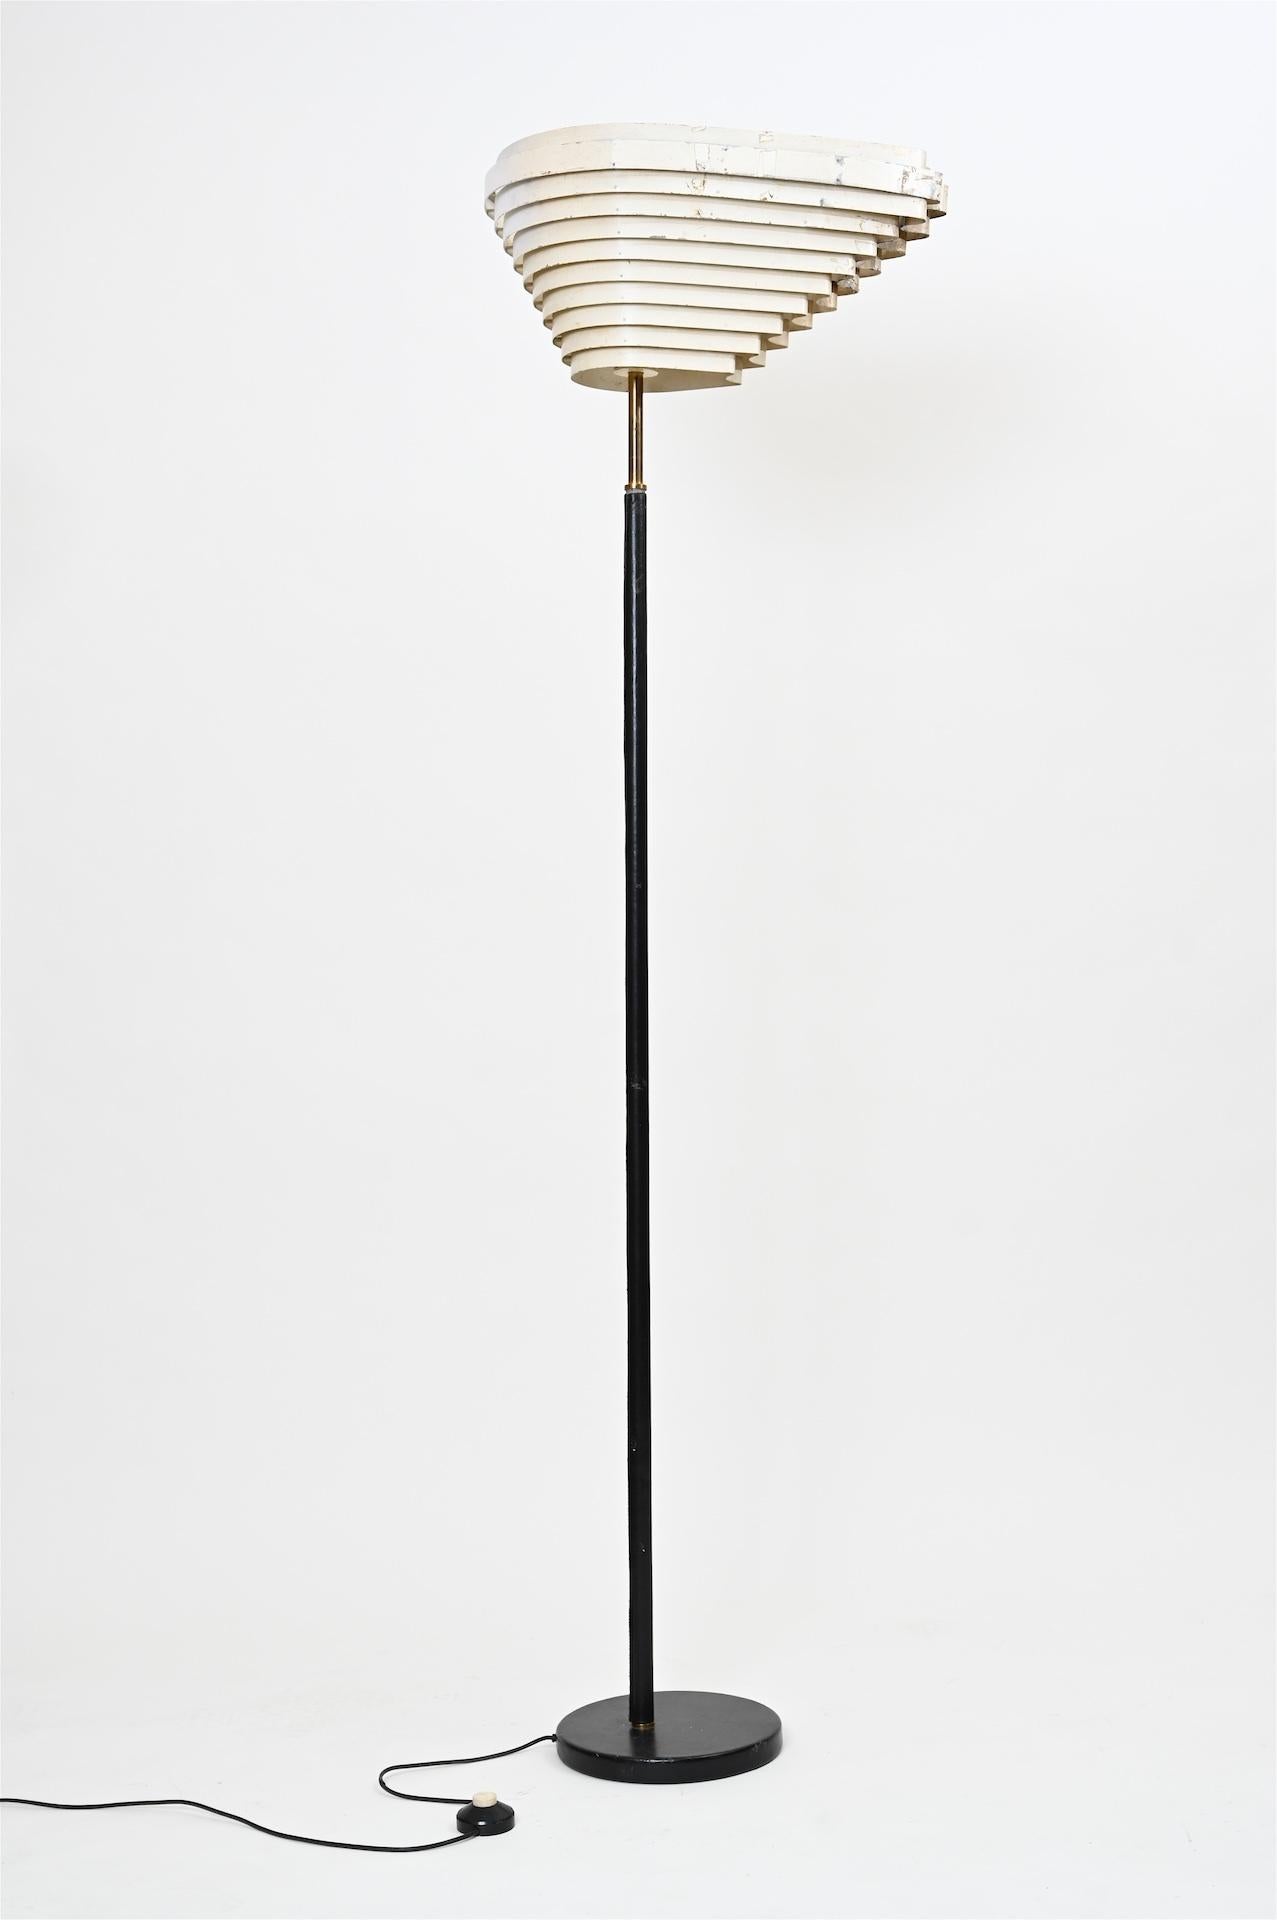 Original and rare floor lamp. Model A805, 'Angel Wing', designed by Alvar Aalto. 

Produced by Valaistustyö in Finland circa 1954

Light has been rewired. Is in original 1950s condition with some historic restorations to shade. (most of shade